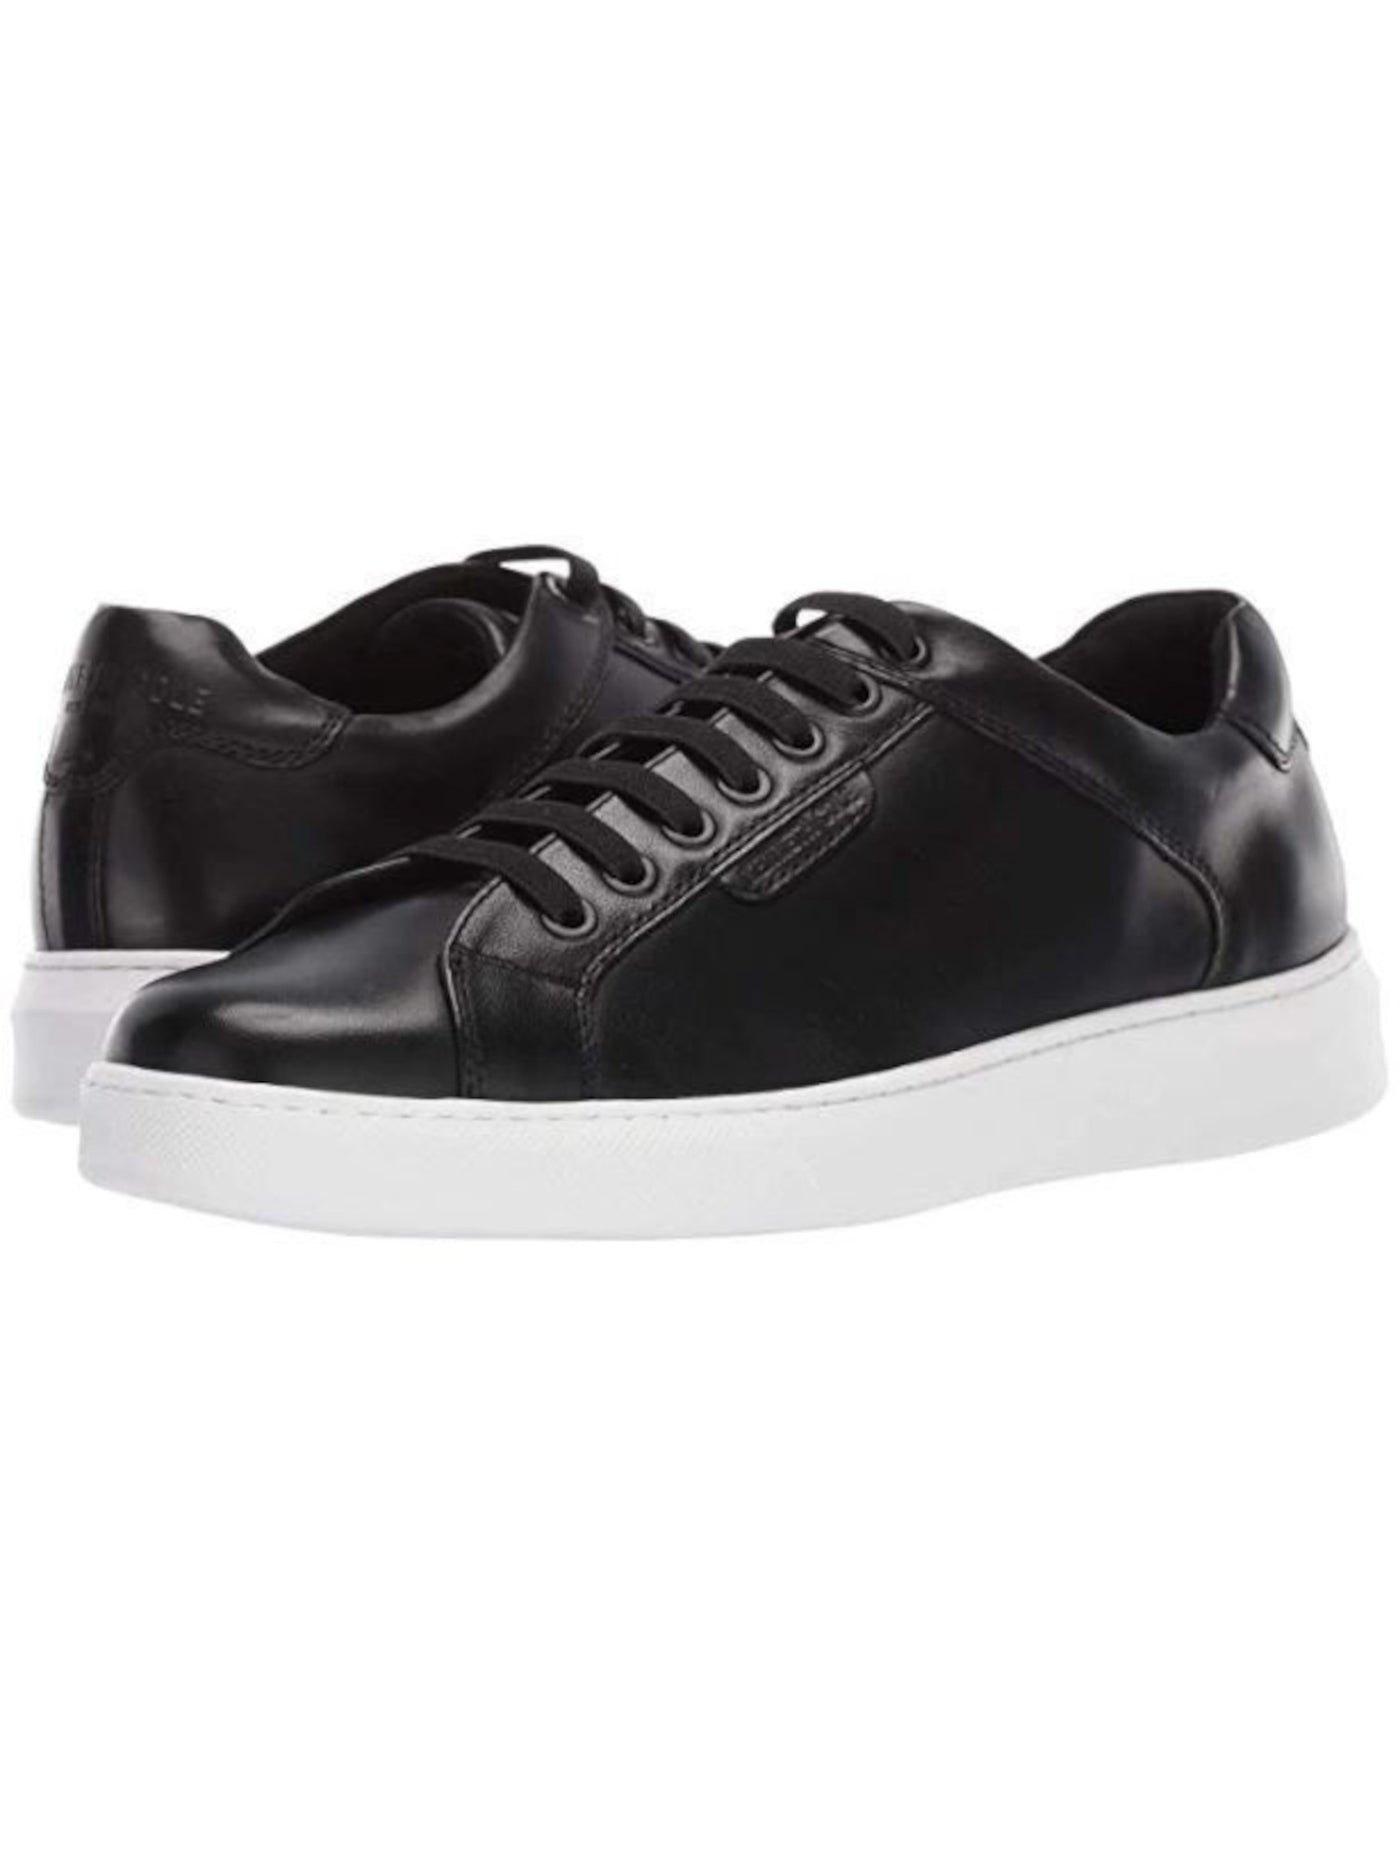 KENNETH COLE NEW YORK Mens Black Padded Liam Round Toe Lace-Up Leather Sneakers Shoes 7.5